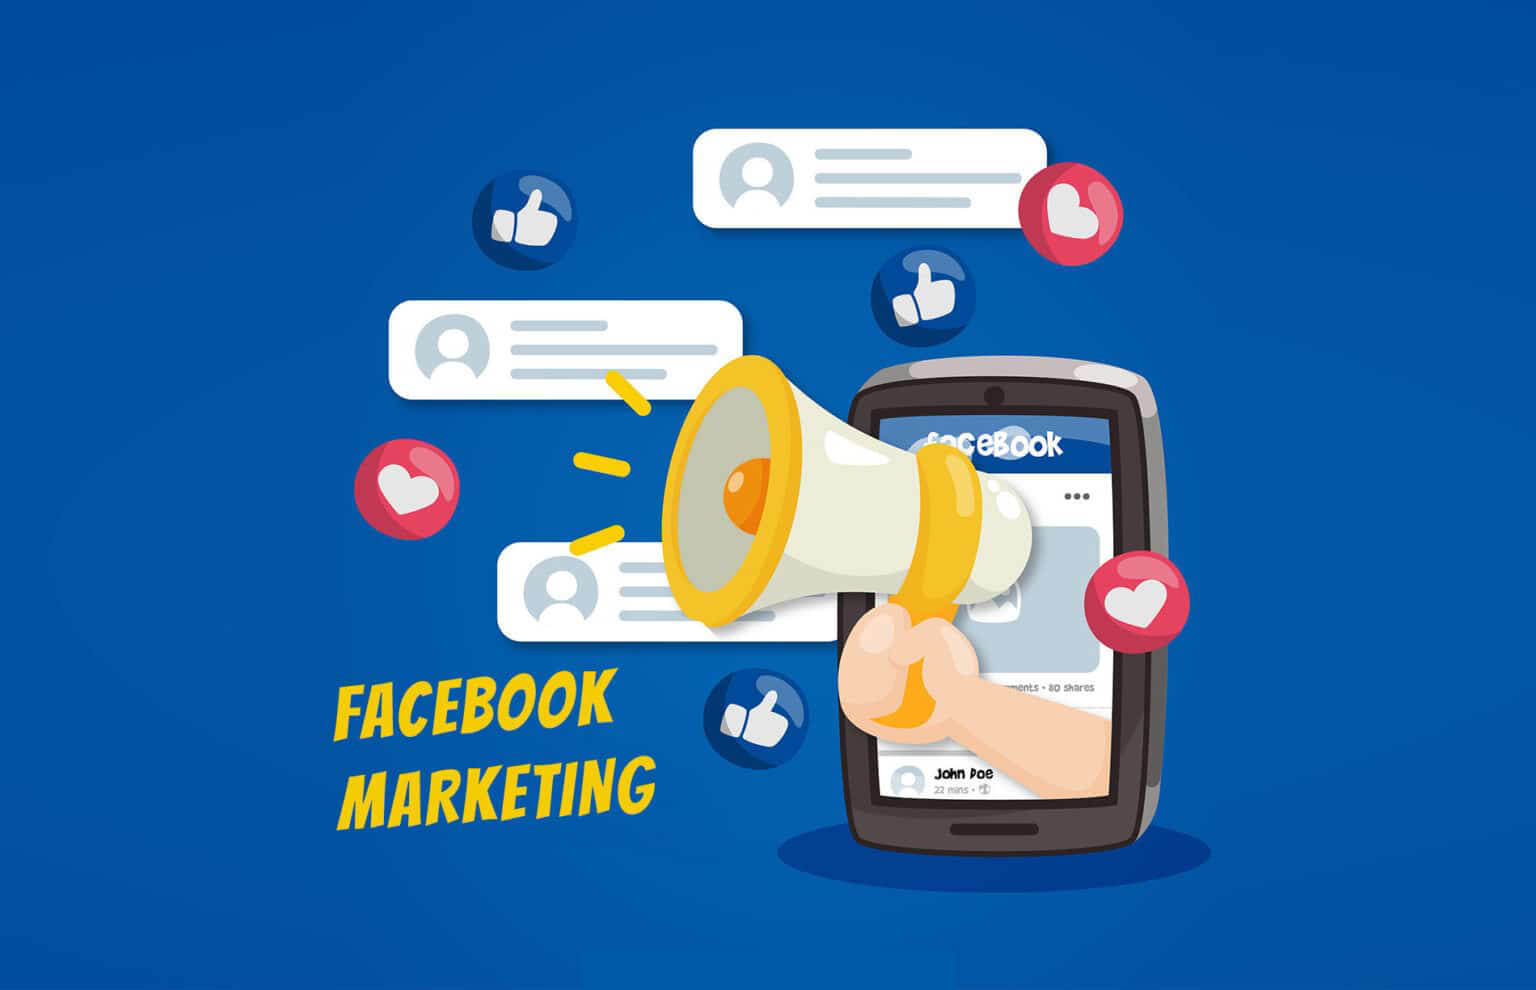 Use Facebook for Marketing